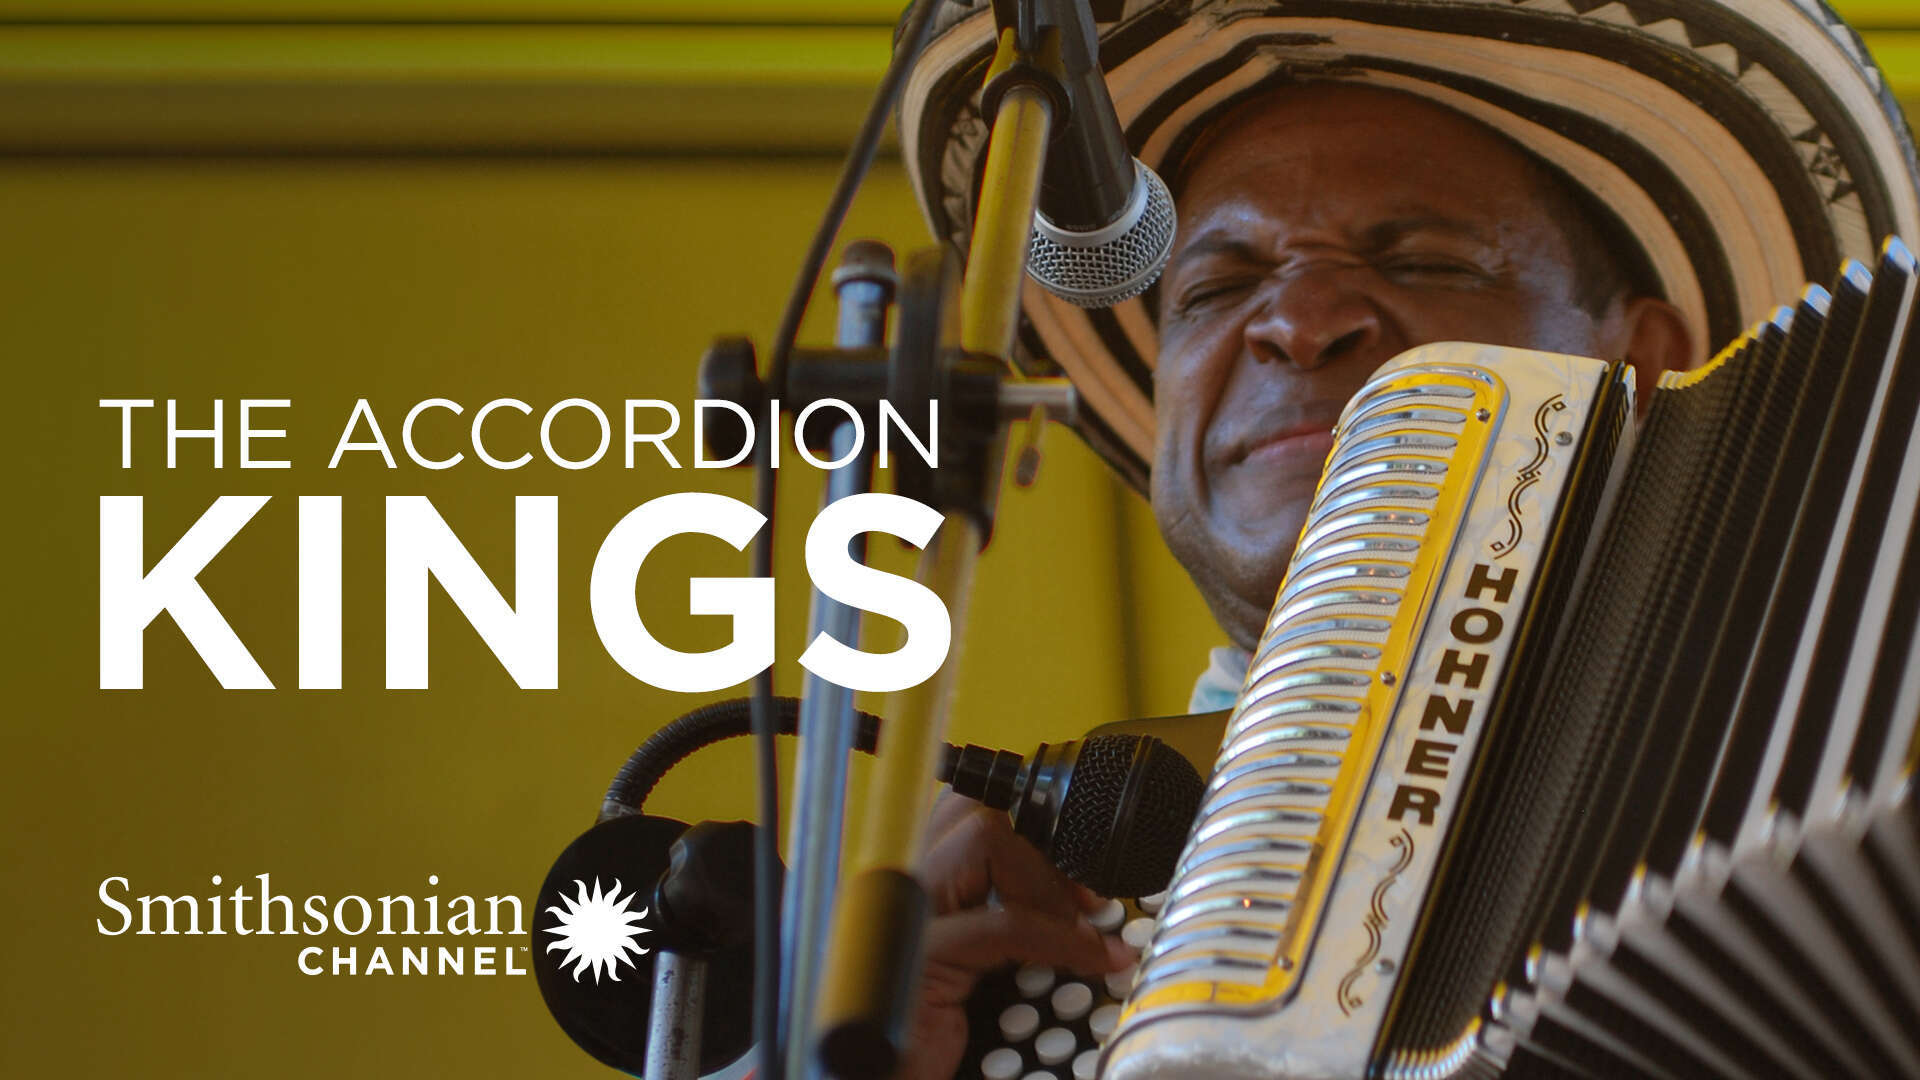 The Accordion Kings - Watch Full Movie on Paramount Plus